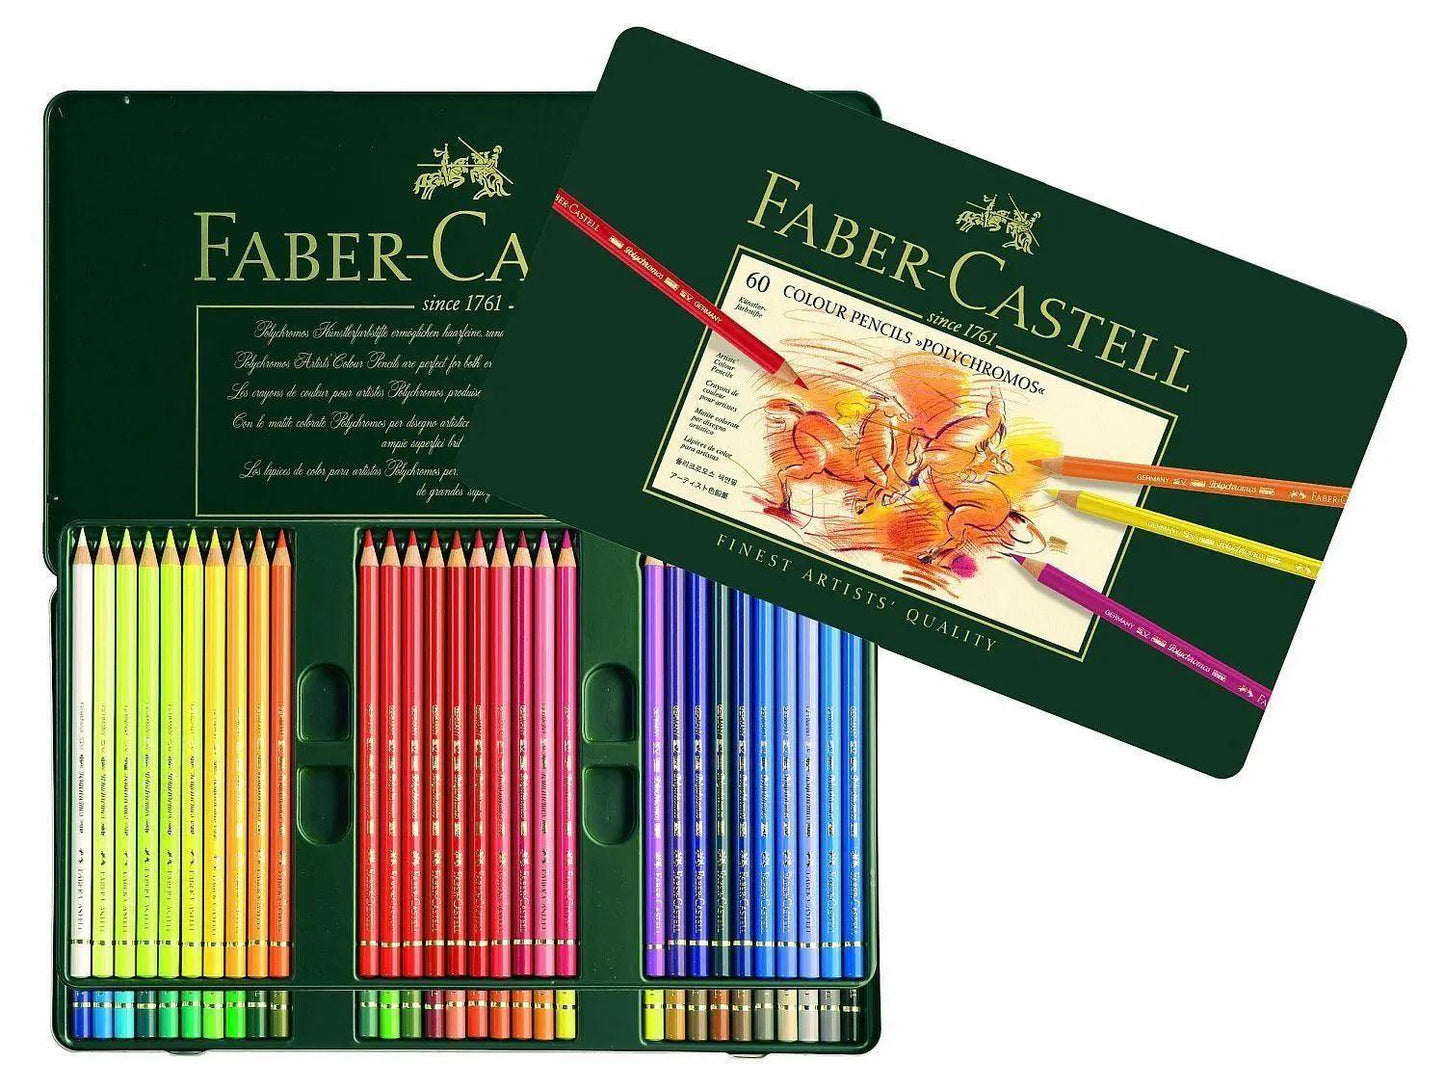 Faber-Castell Polychromos 60 Color Pencils The Stationers